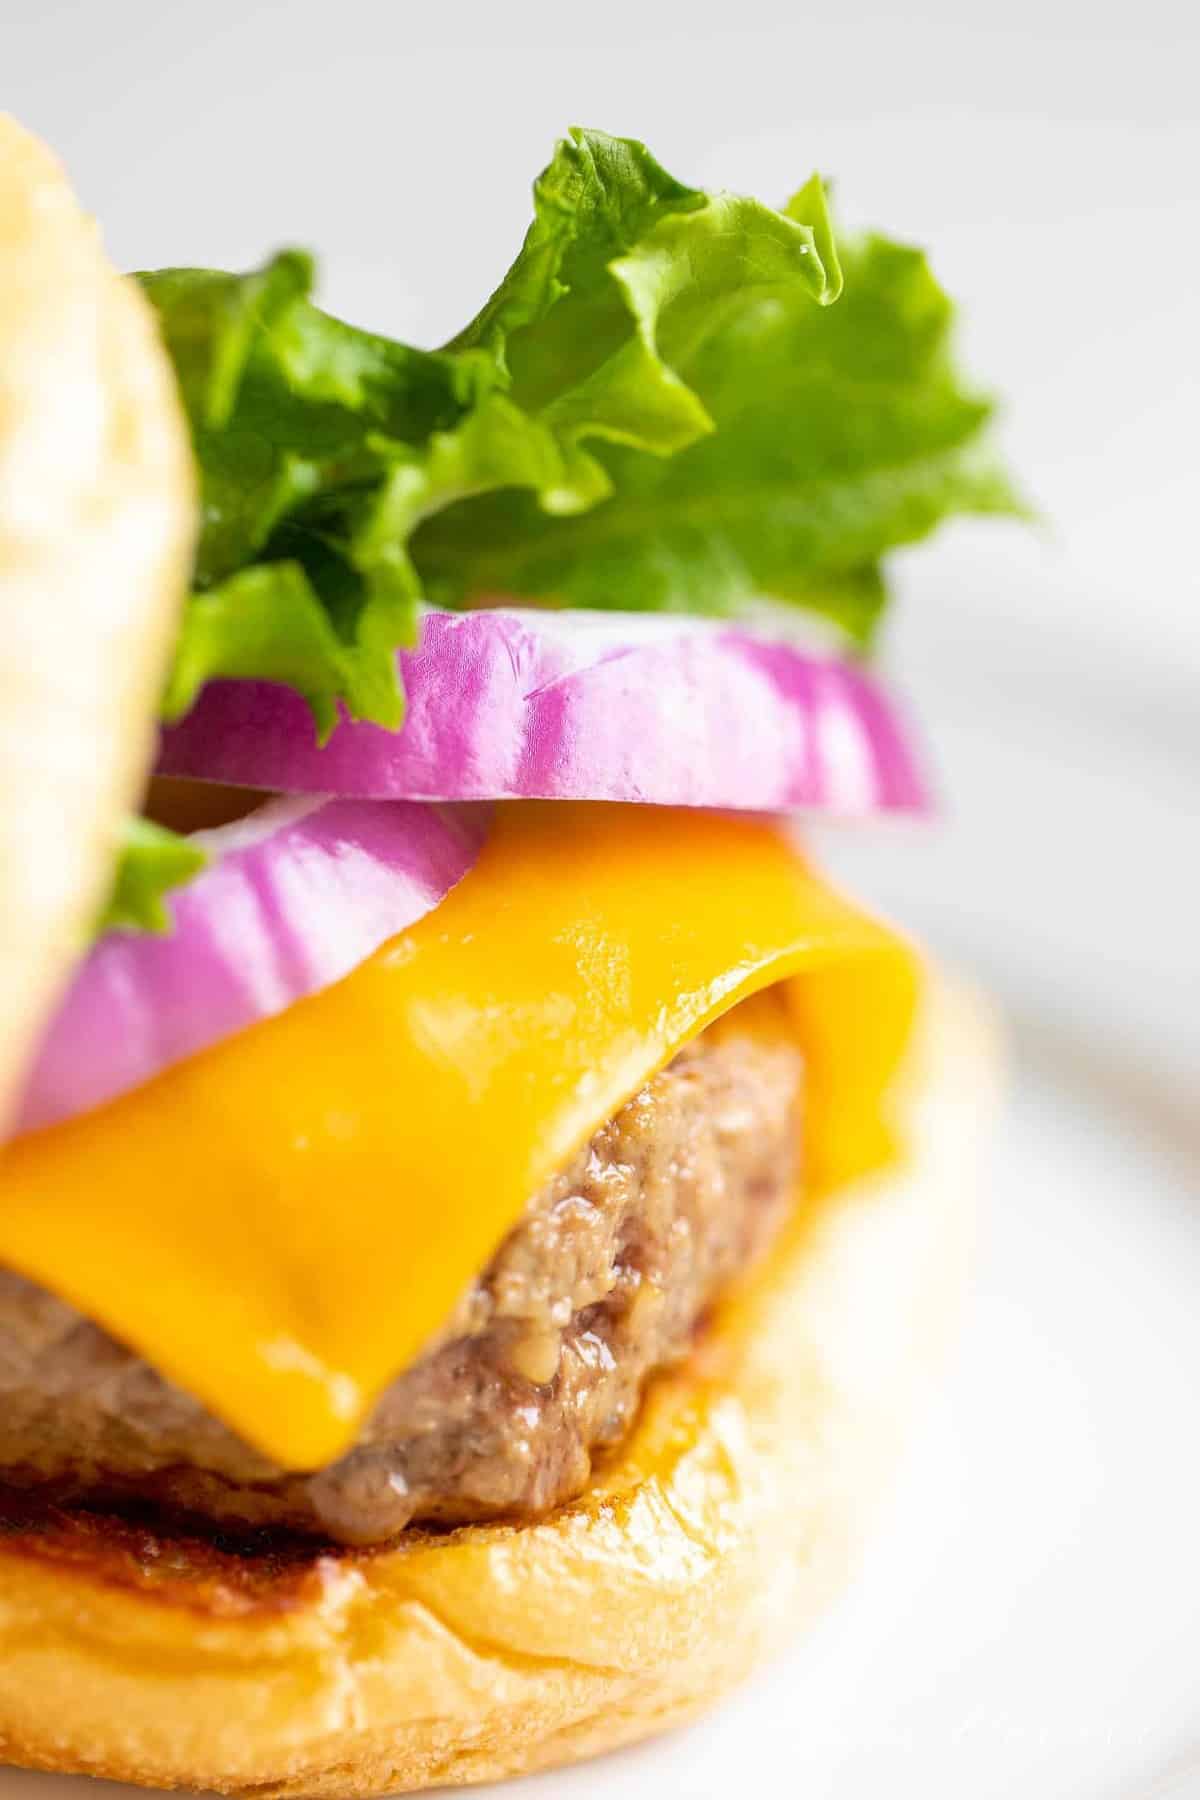 A juicy burger with lettuce, cheese, and onions on a white plate. 